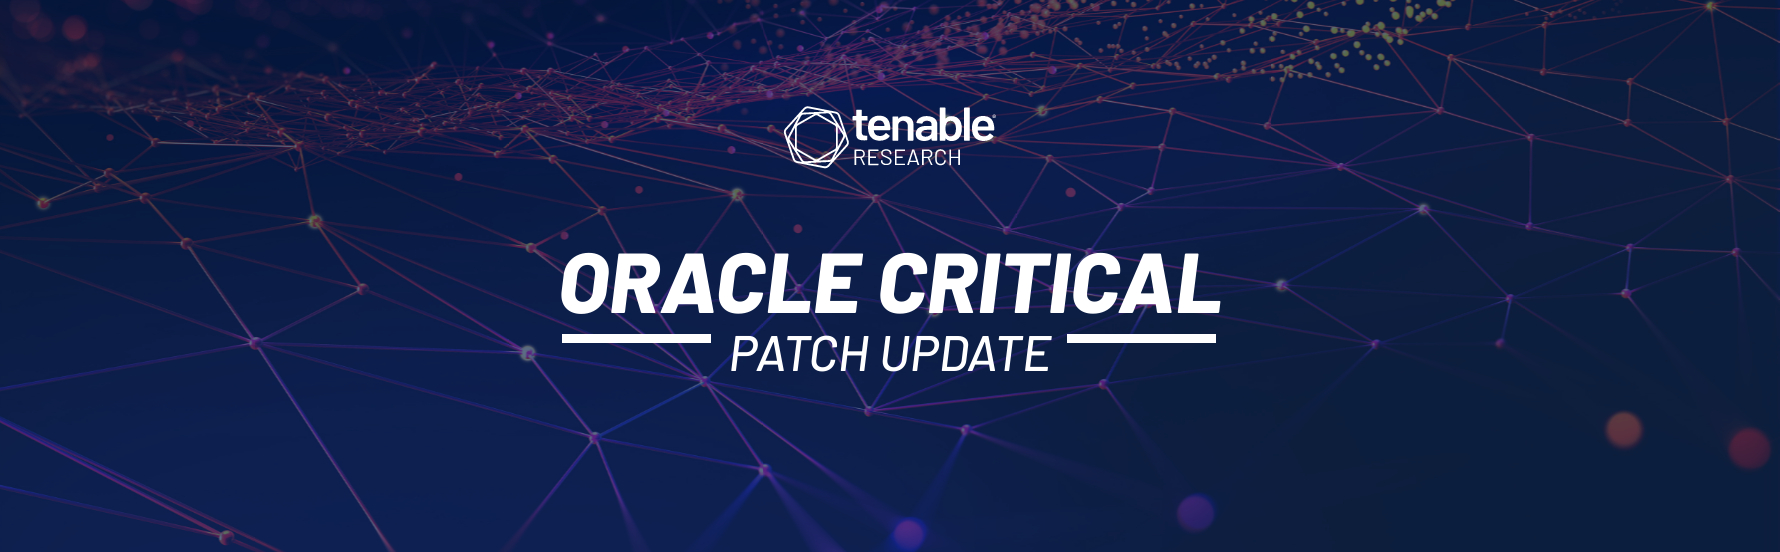 Tenable Research's Analysis of the Oracle Critical Patch Update